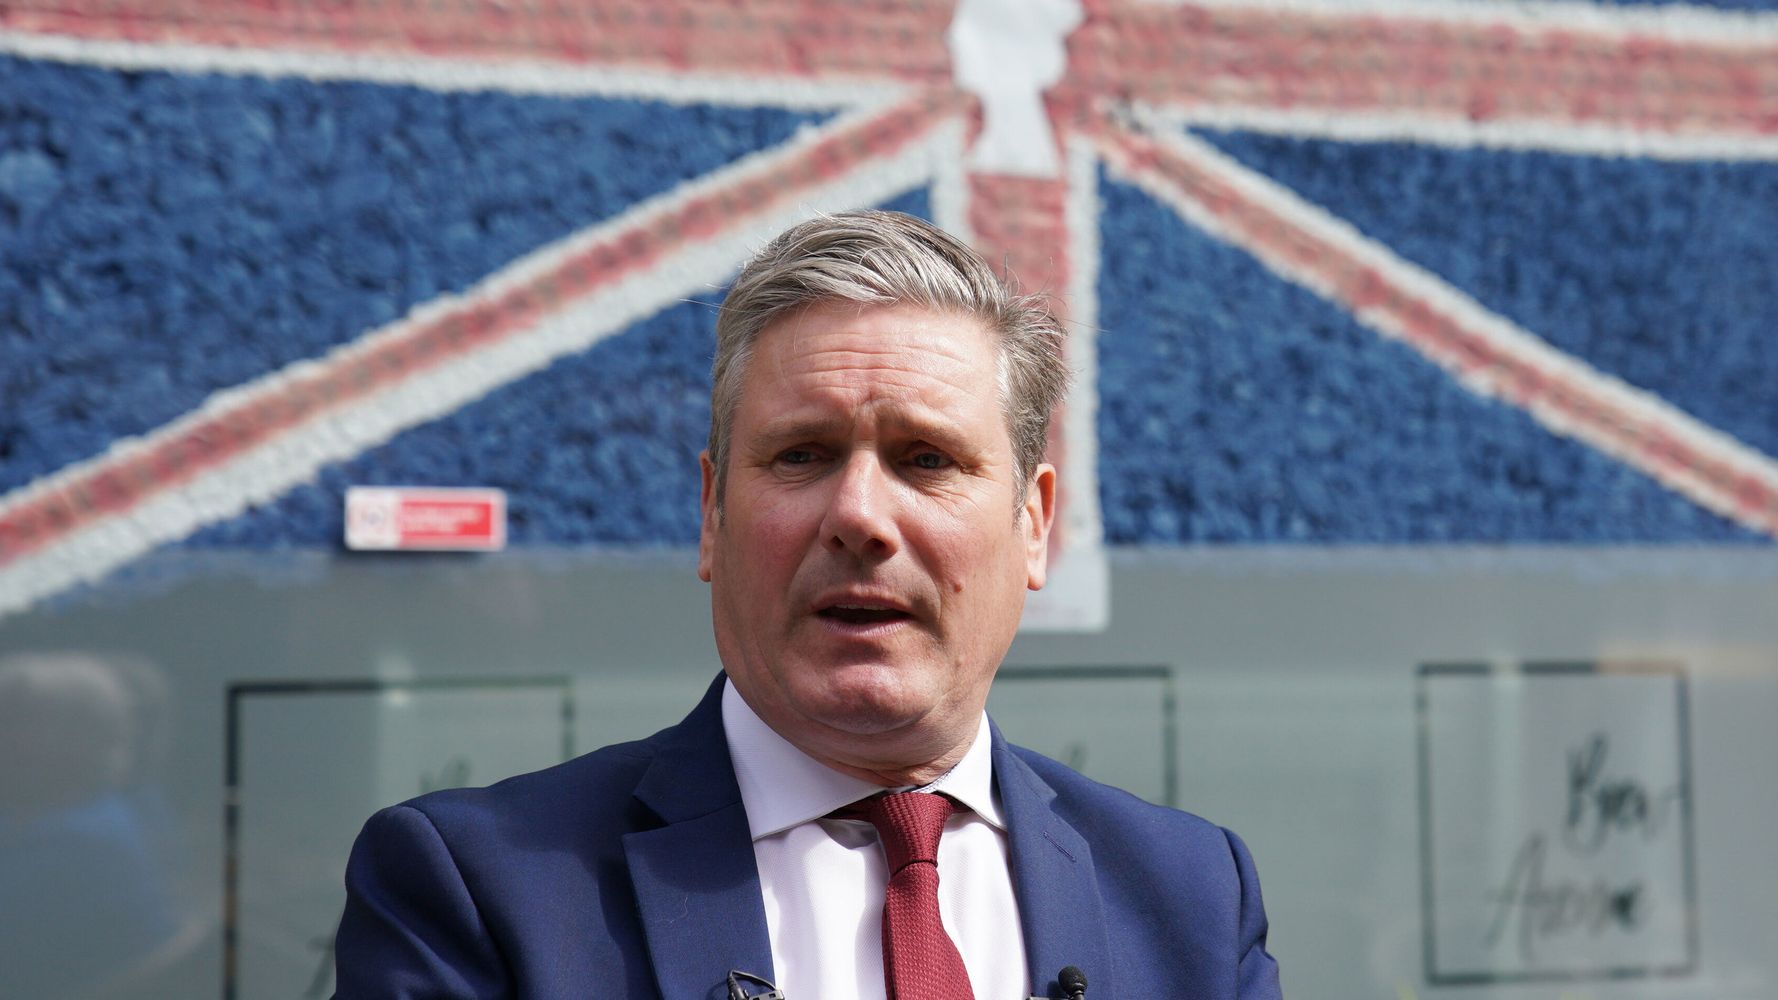 Keir Starmer Confirms He Has Ditched All Of The Pledges In Labour's 2019 Manifesto